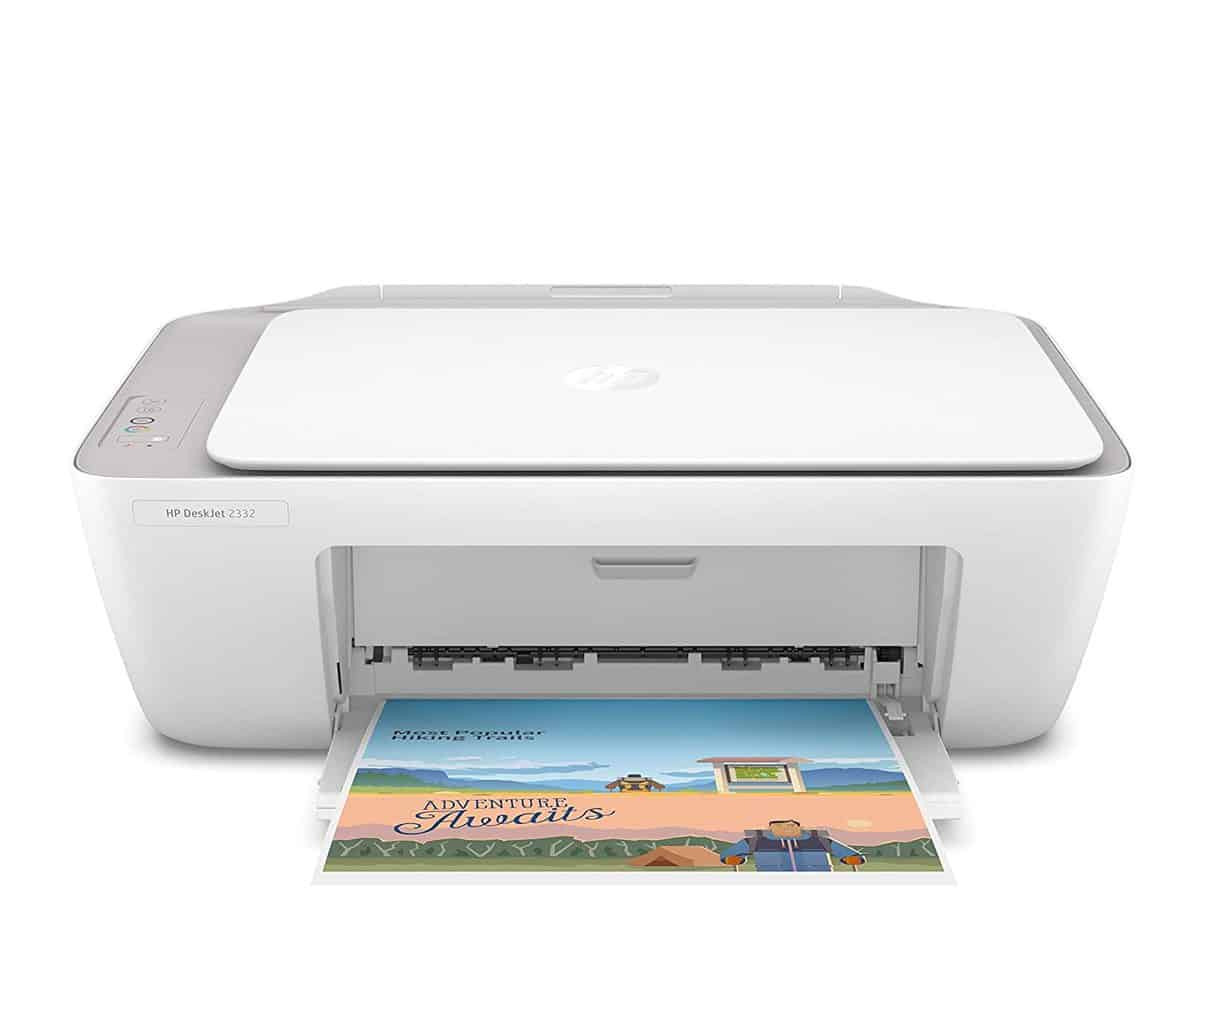 HP Deskjet 2332 Colour Printer, Scanner and Copier for Home/Small Office,  Compact Size, Reliable, and Affordable Printing, Easy Set-up Through HP  Smart App on Your PC Connected Through USB – DATAMATION